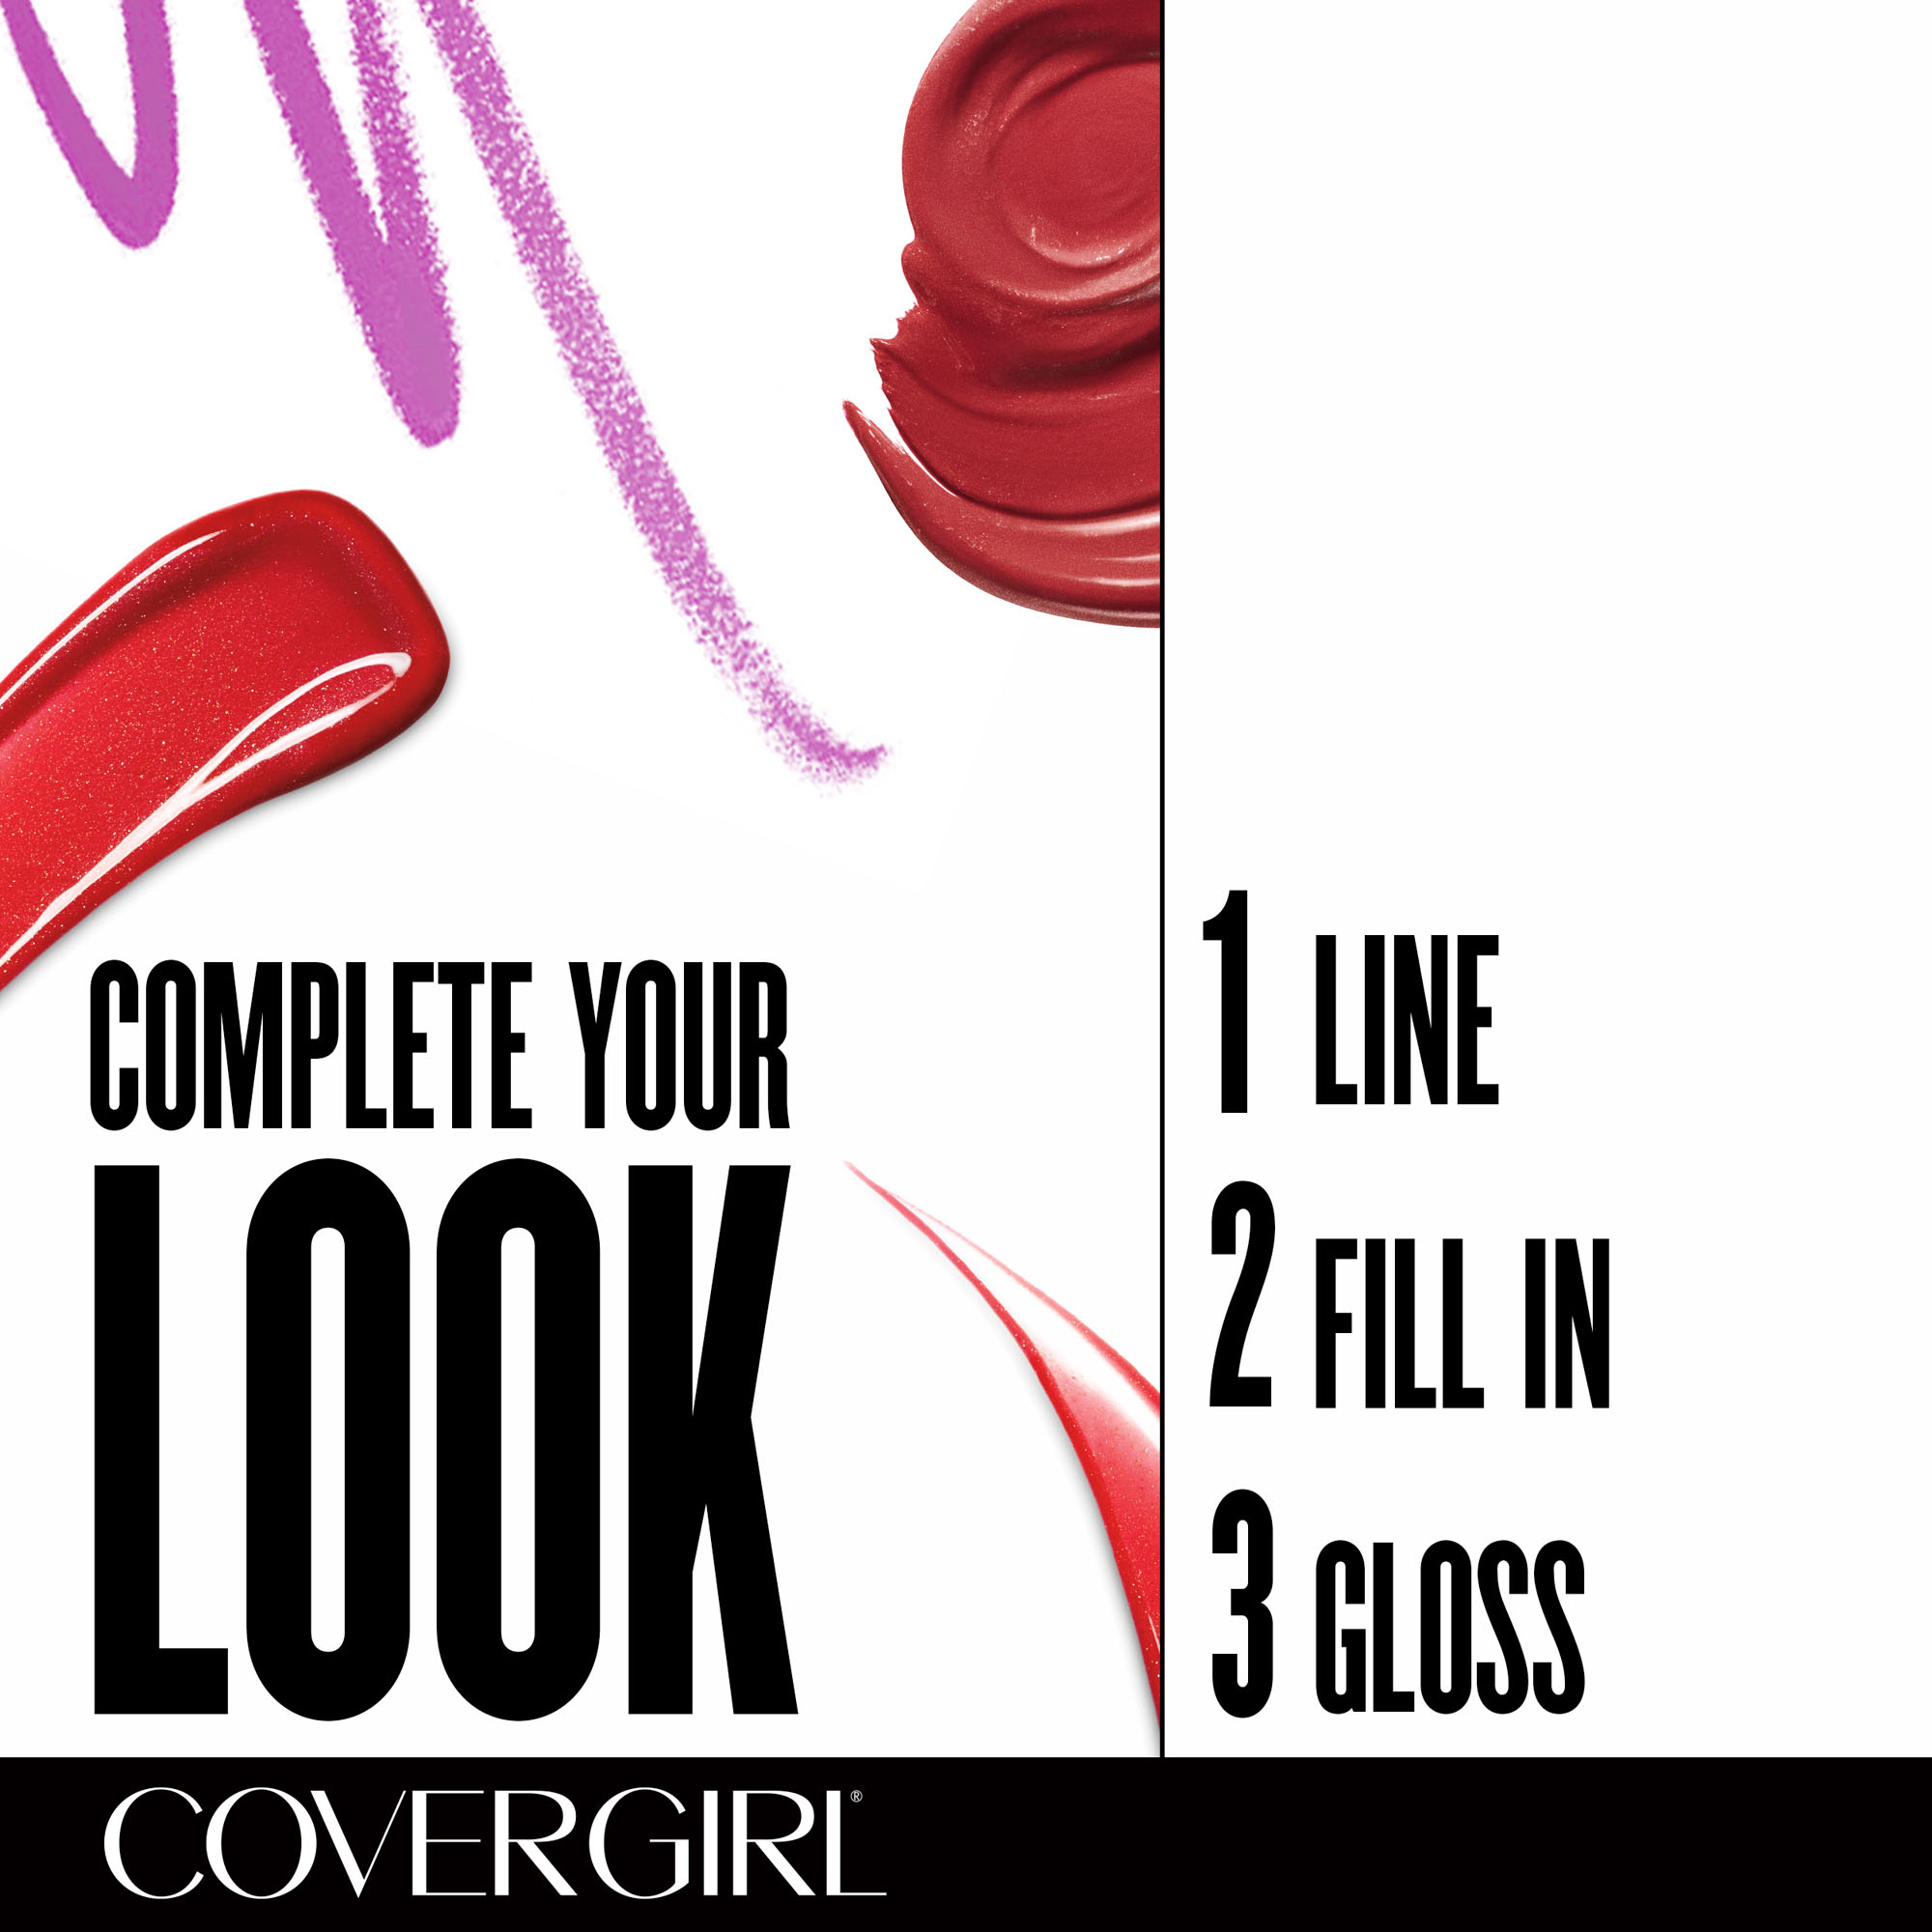 COVERGIRL Outlast All-Day Moisturizing Lip Color, Ultra Violet - image 5 of 5